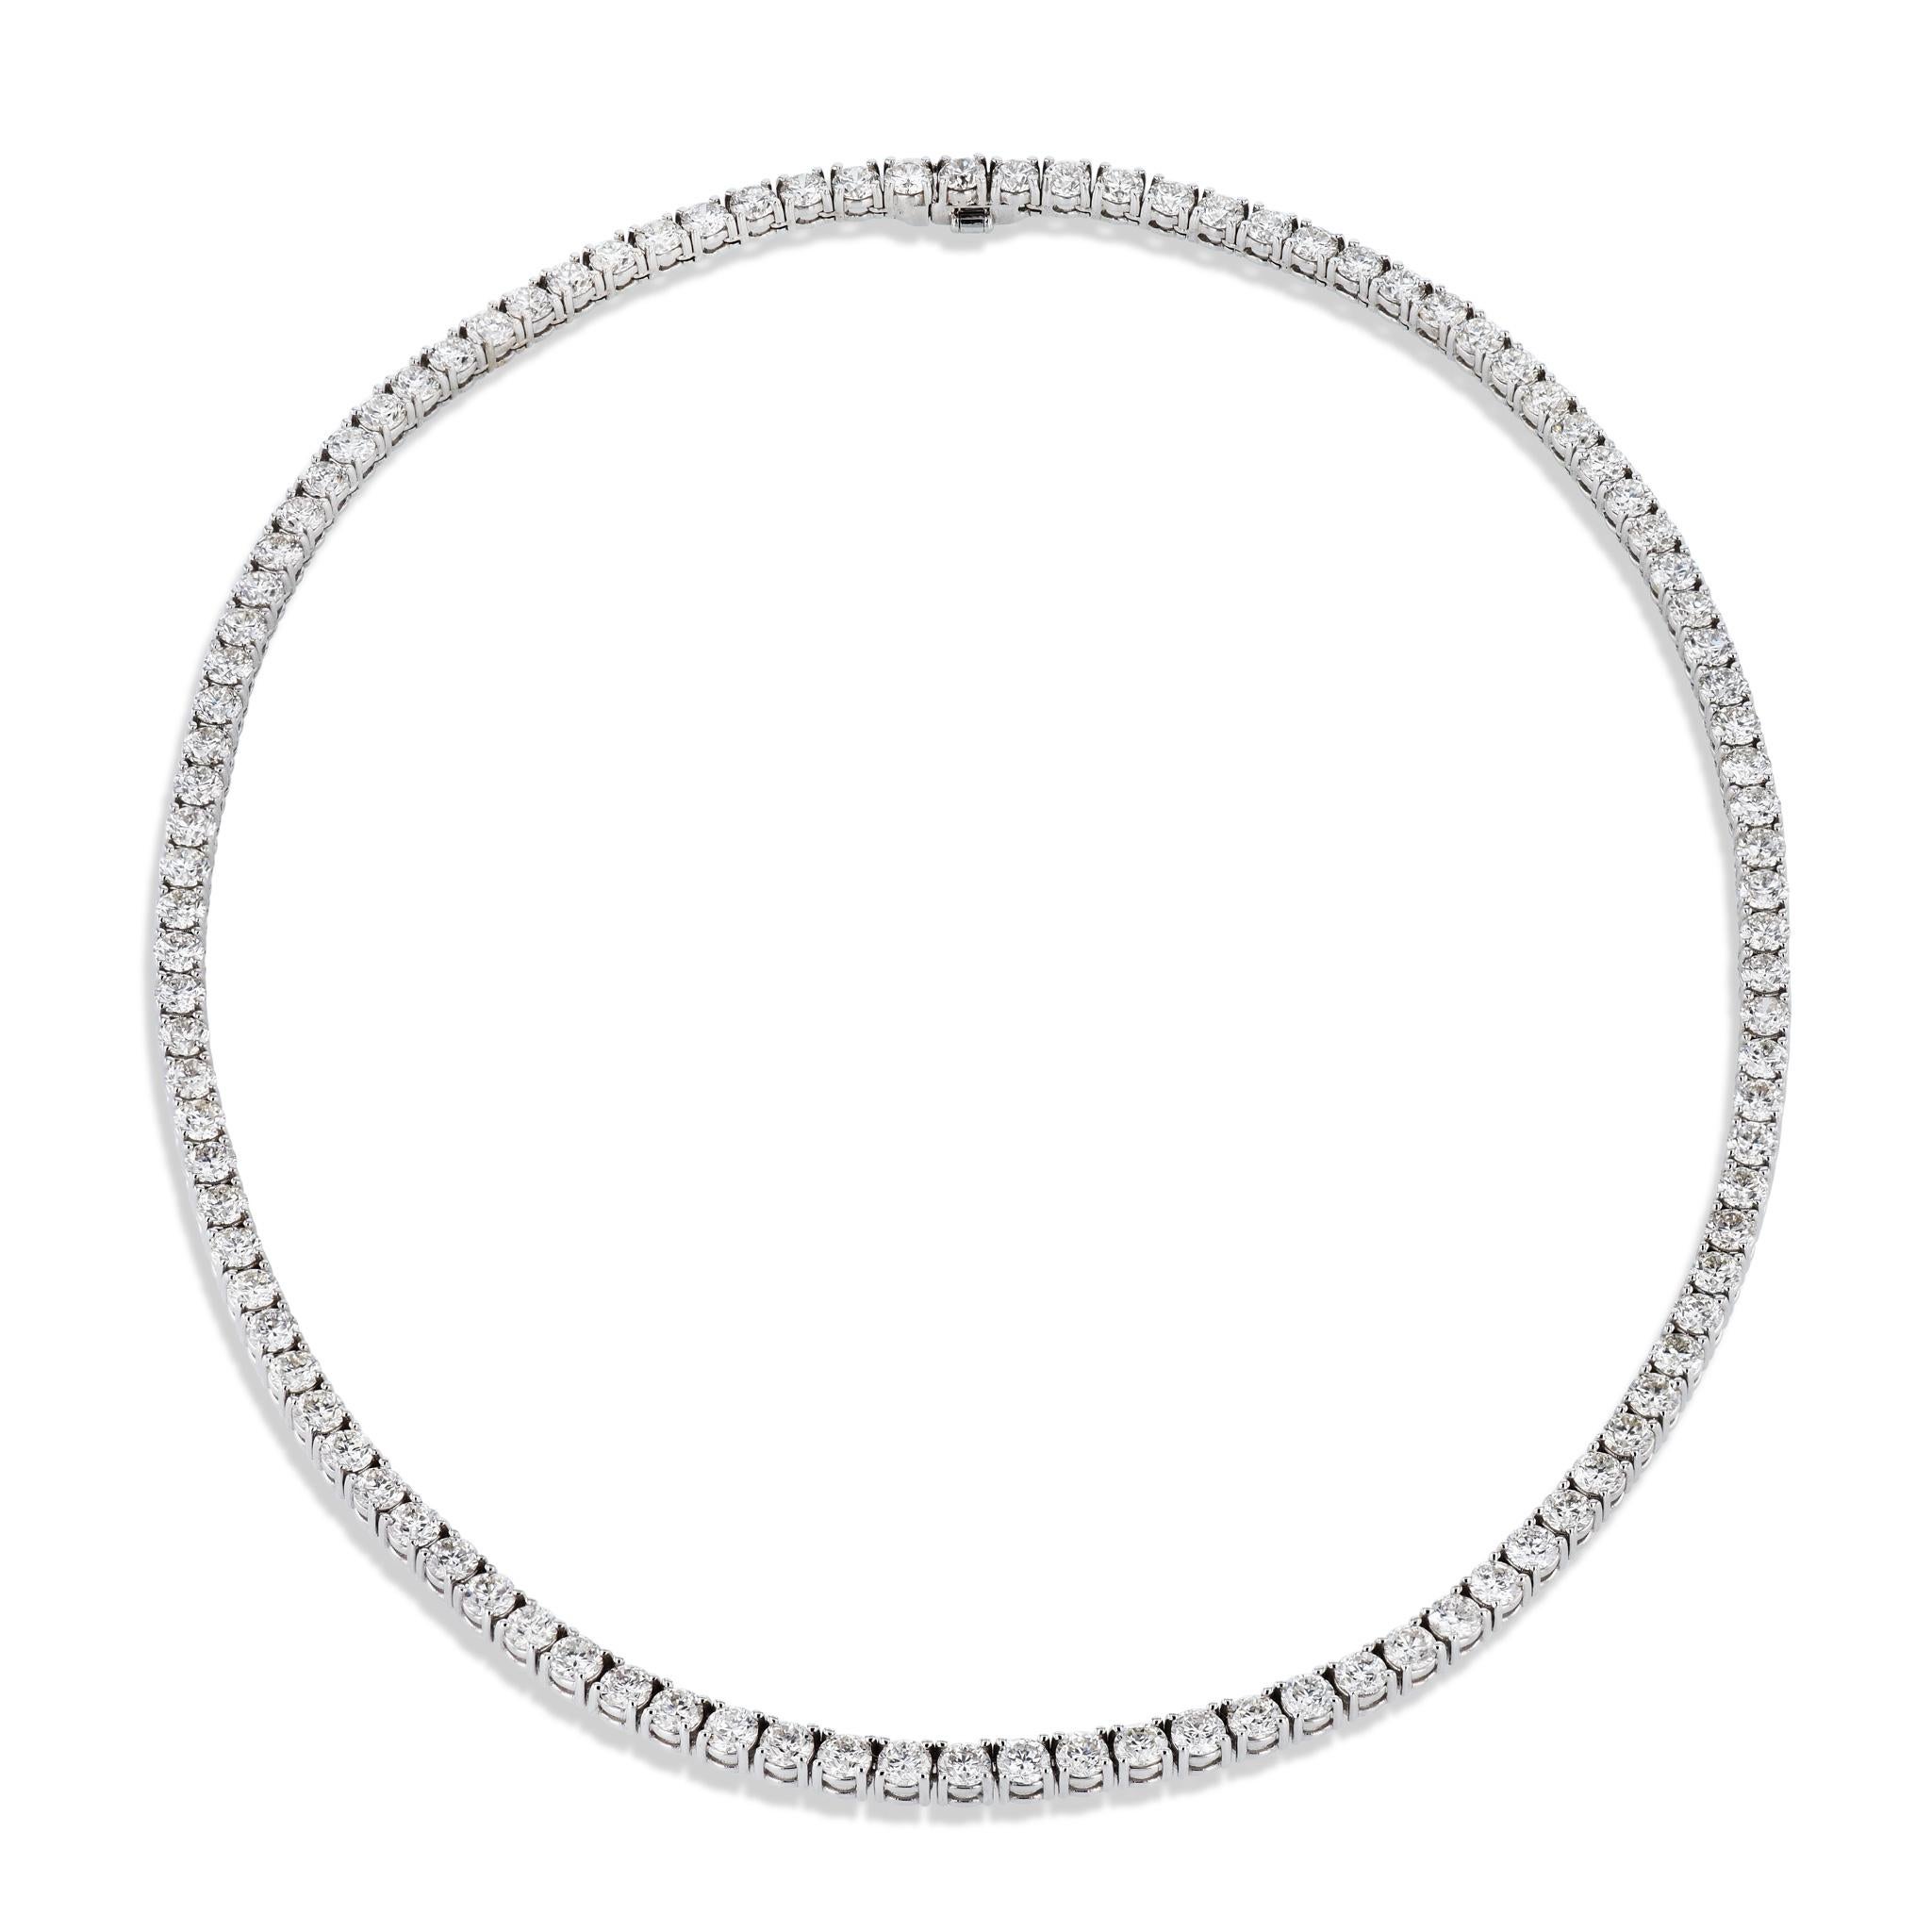 Handmade 19.87 Carat Diamond White Gold Tennis Necklace In New Condition For Sale In Miami, FL